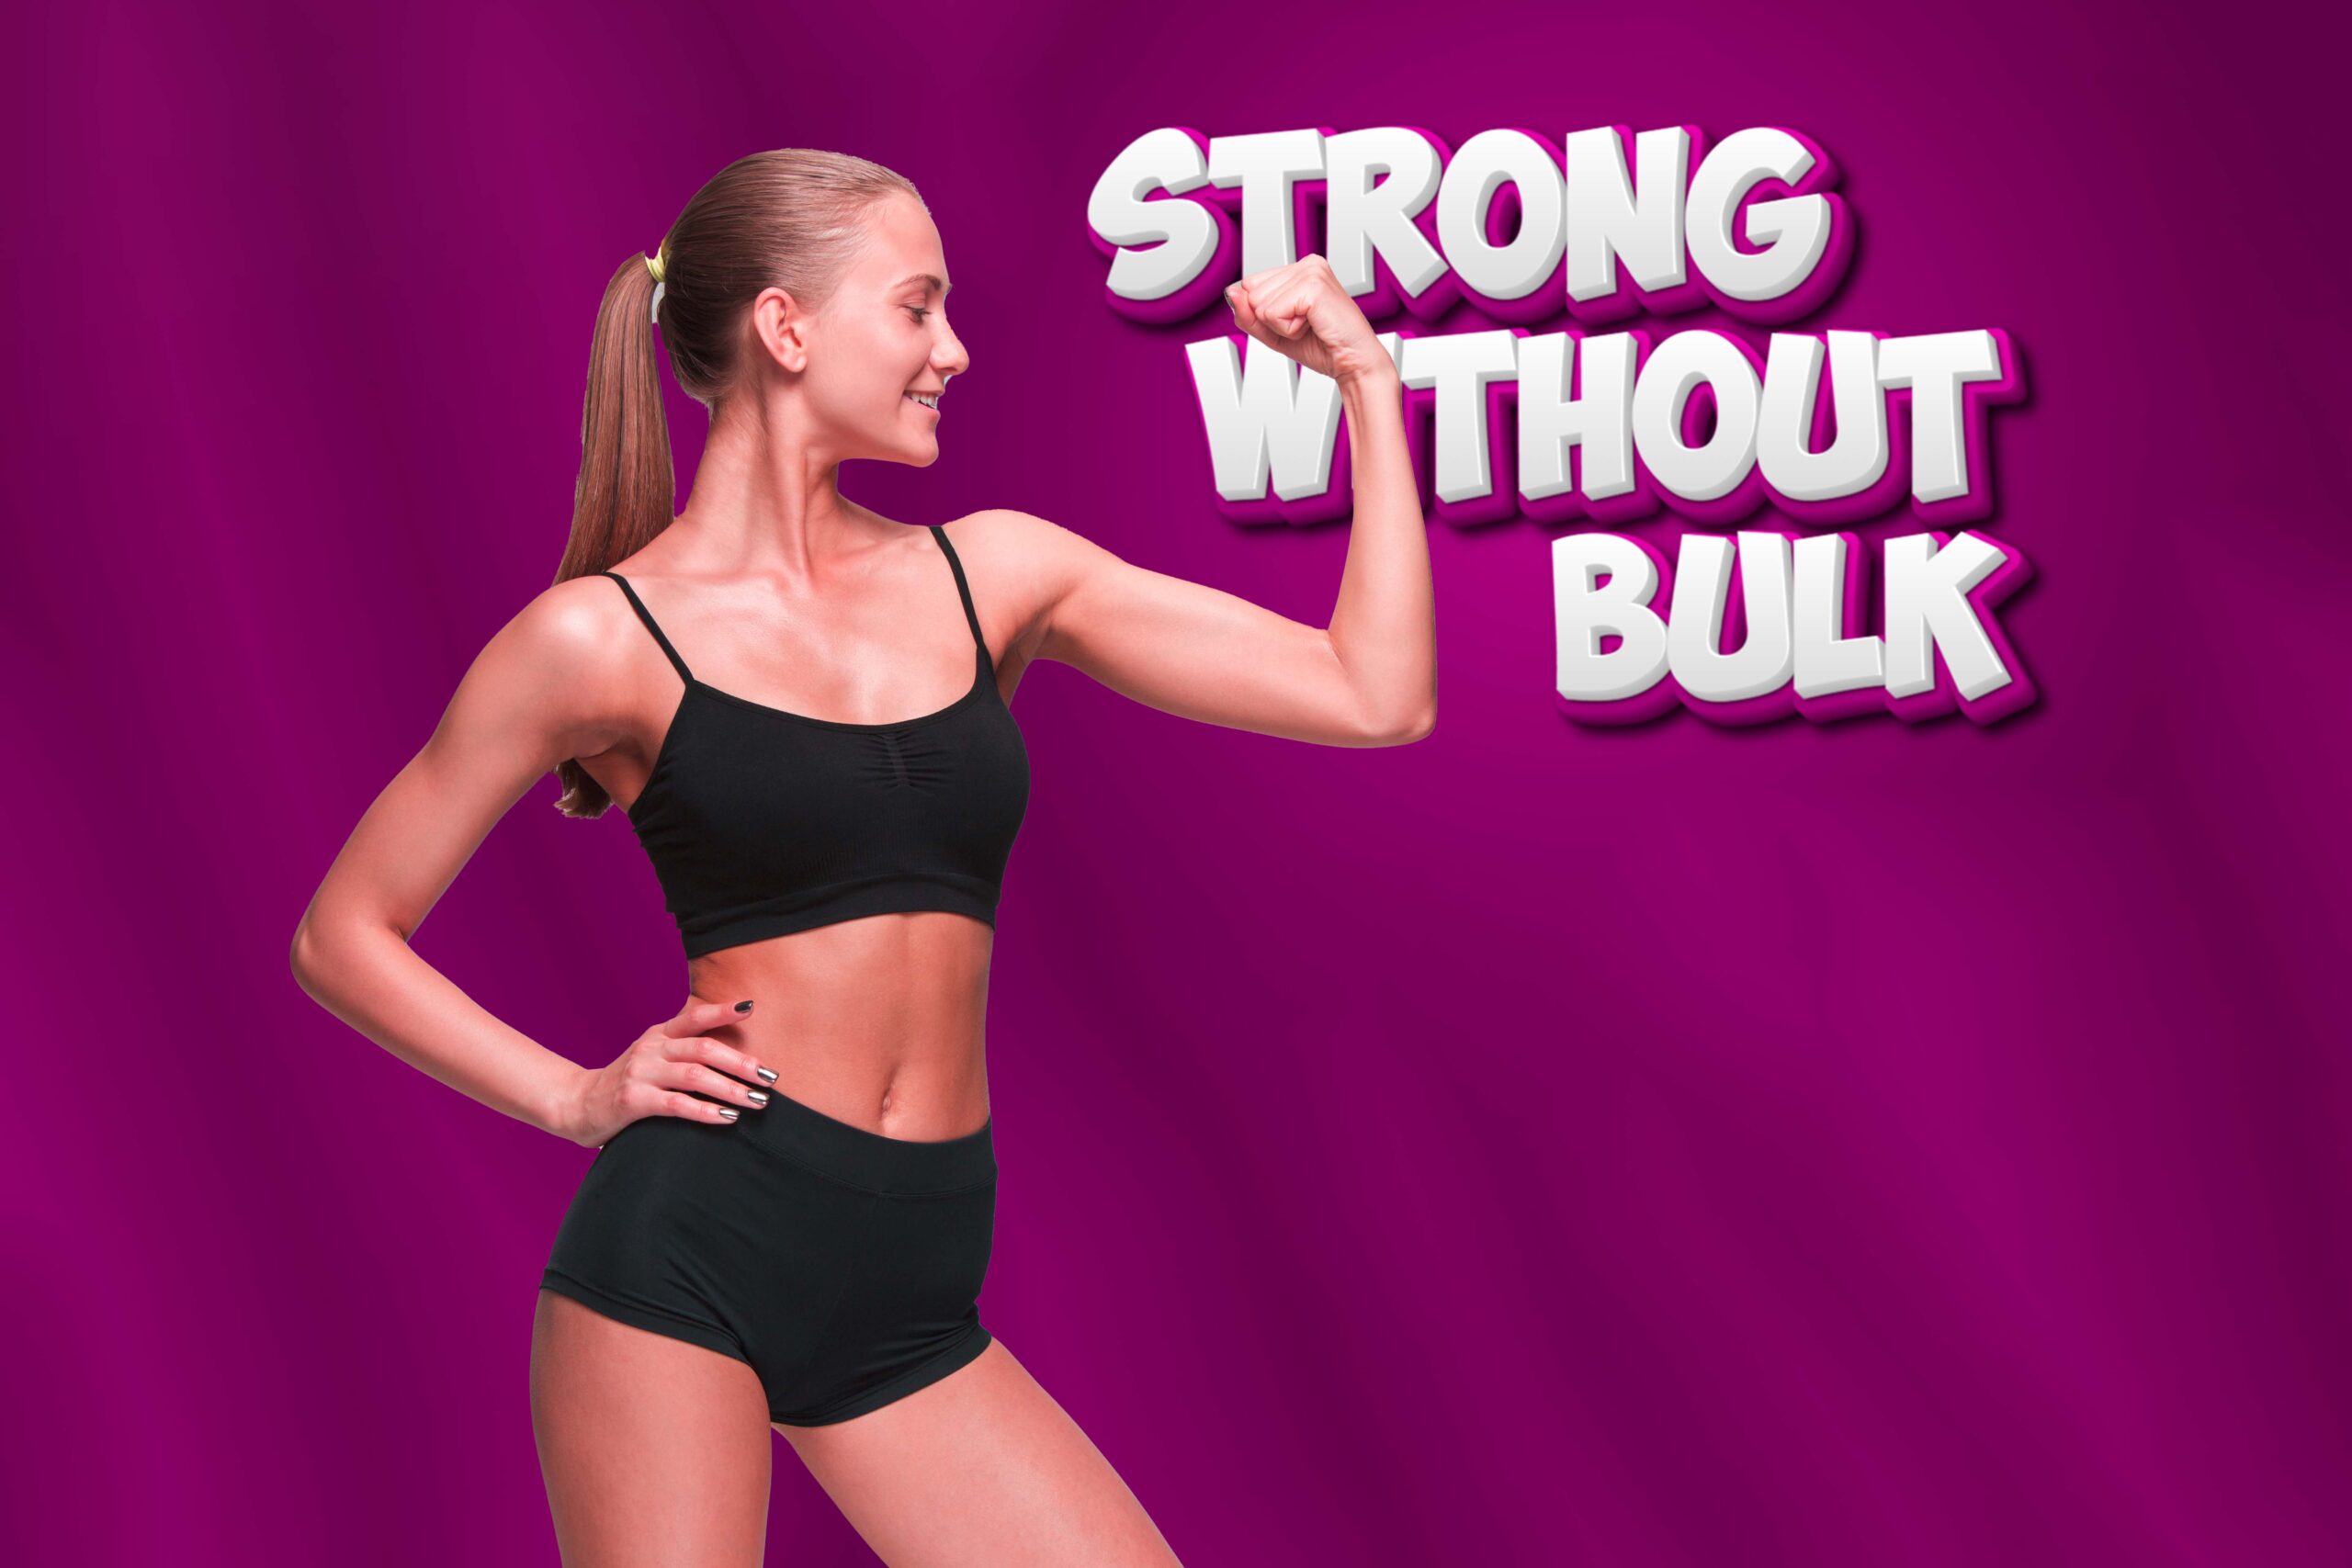 How Women Can Get Stronger Without Getting Bulky